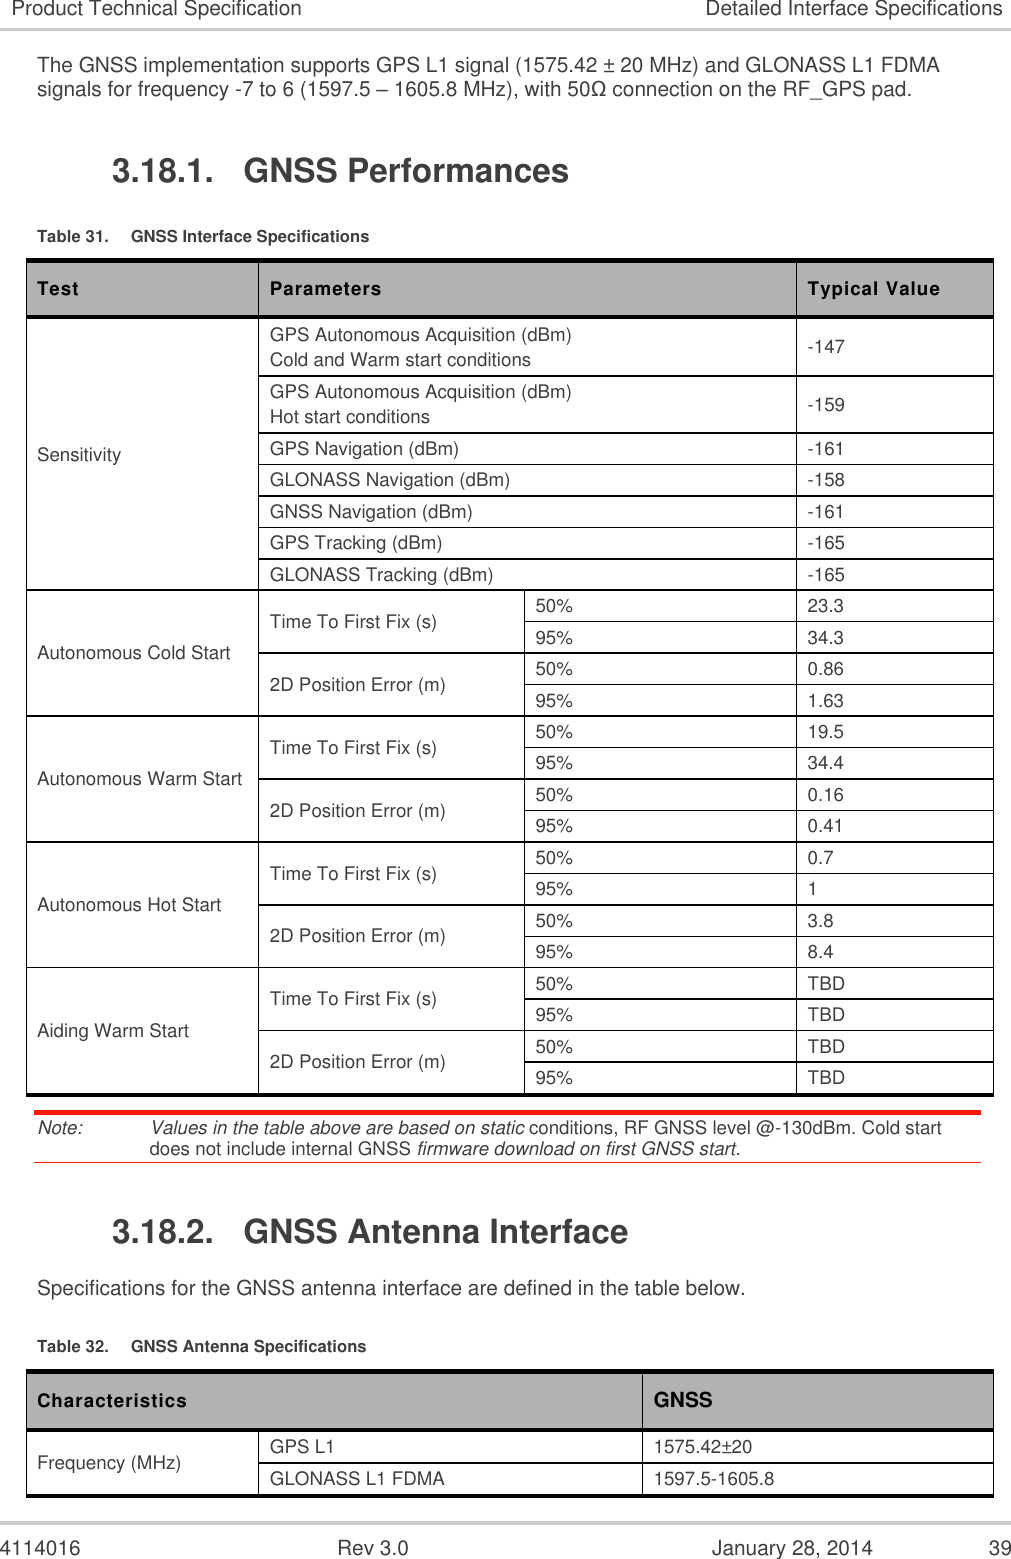  4114016  Rev 3.0  January 28, 2014  39 Product Technical Specification Detailed Interface Specifications The GNSS implementation supports GPS L1 signal (1575.42 ± 20 MHz) and GLONASS L1 FDMA signals for frequency -7 to 6 (1597.5 – 1605.8 MHz), with 50Ω connection on the RF_GPS pad. 3.18.1.  GNSS Performances Table 31.  GNSS Interface Specifications Test Parameters Typical Value Sensitivity GPS Autonomous Acquisition (dBm) Cold and Warm start conditions -147 GPS Autonomous Acquisition (dBm) Hot start conditions -159 GPS Navigation (dBm) -161 GLONASS Navigation (dBm) -158 GNSS Navigation (dBm) -161 GPS Tracking (dBm) -165 GLONASS Tracking (dBm) -165 Autonomous Cold Start  Time To First Fix (s) 50% 23.3 95% 34.3 2D Position Error (m) 50% 0.86 95% 1.63 Autonomous Warm Start Time To First Fix (s) 50% 19.5 95% 34.4 2D Position Error (m) 50% 0.16 95% 0.41 Autonomous Hot Start Time To First Fix (s) 50% 0.7 95% 1 2D Position Error (m) 50% 3.8 95% 8.4 Aiding Warm Start Time To First Fix (s) 50% TBD 95% TBD 2D Position Error (m) 50% TBD 95% TBD Note:   Values in the table above are based on static conditions, RF GNSS level @-130dBm. Cold start does not include internal GNSS firmware download on first GNSS start. 3.18.2.  GNSS Antenna Interface Specifications for the GNSS antenna interface are defined in the table below. Table 32.  GNSS Antenna Specifications Characteristics GNSS Frequency (MHz) GPS L1 1575.42±20 GLONASS L1 FDMA 1597.5-1605.8 